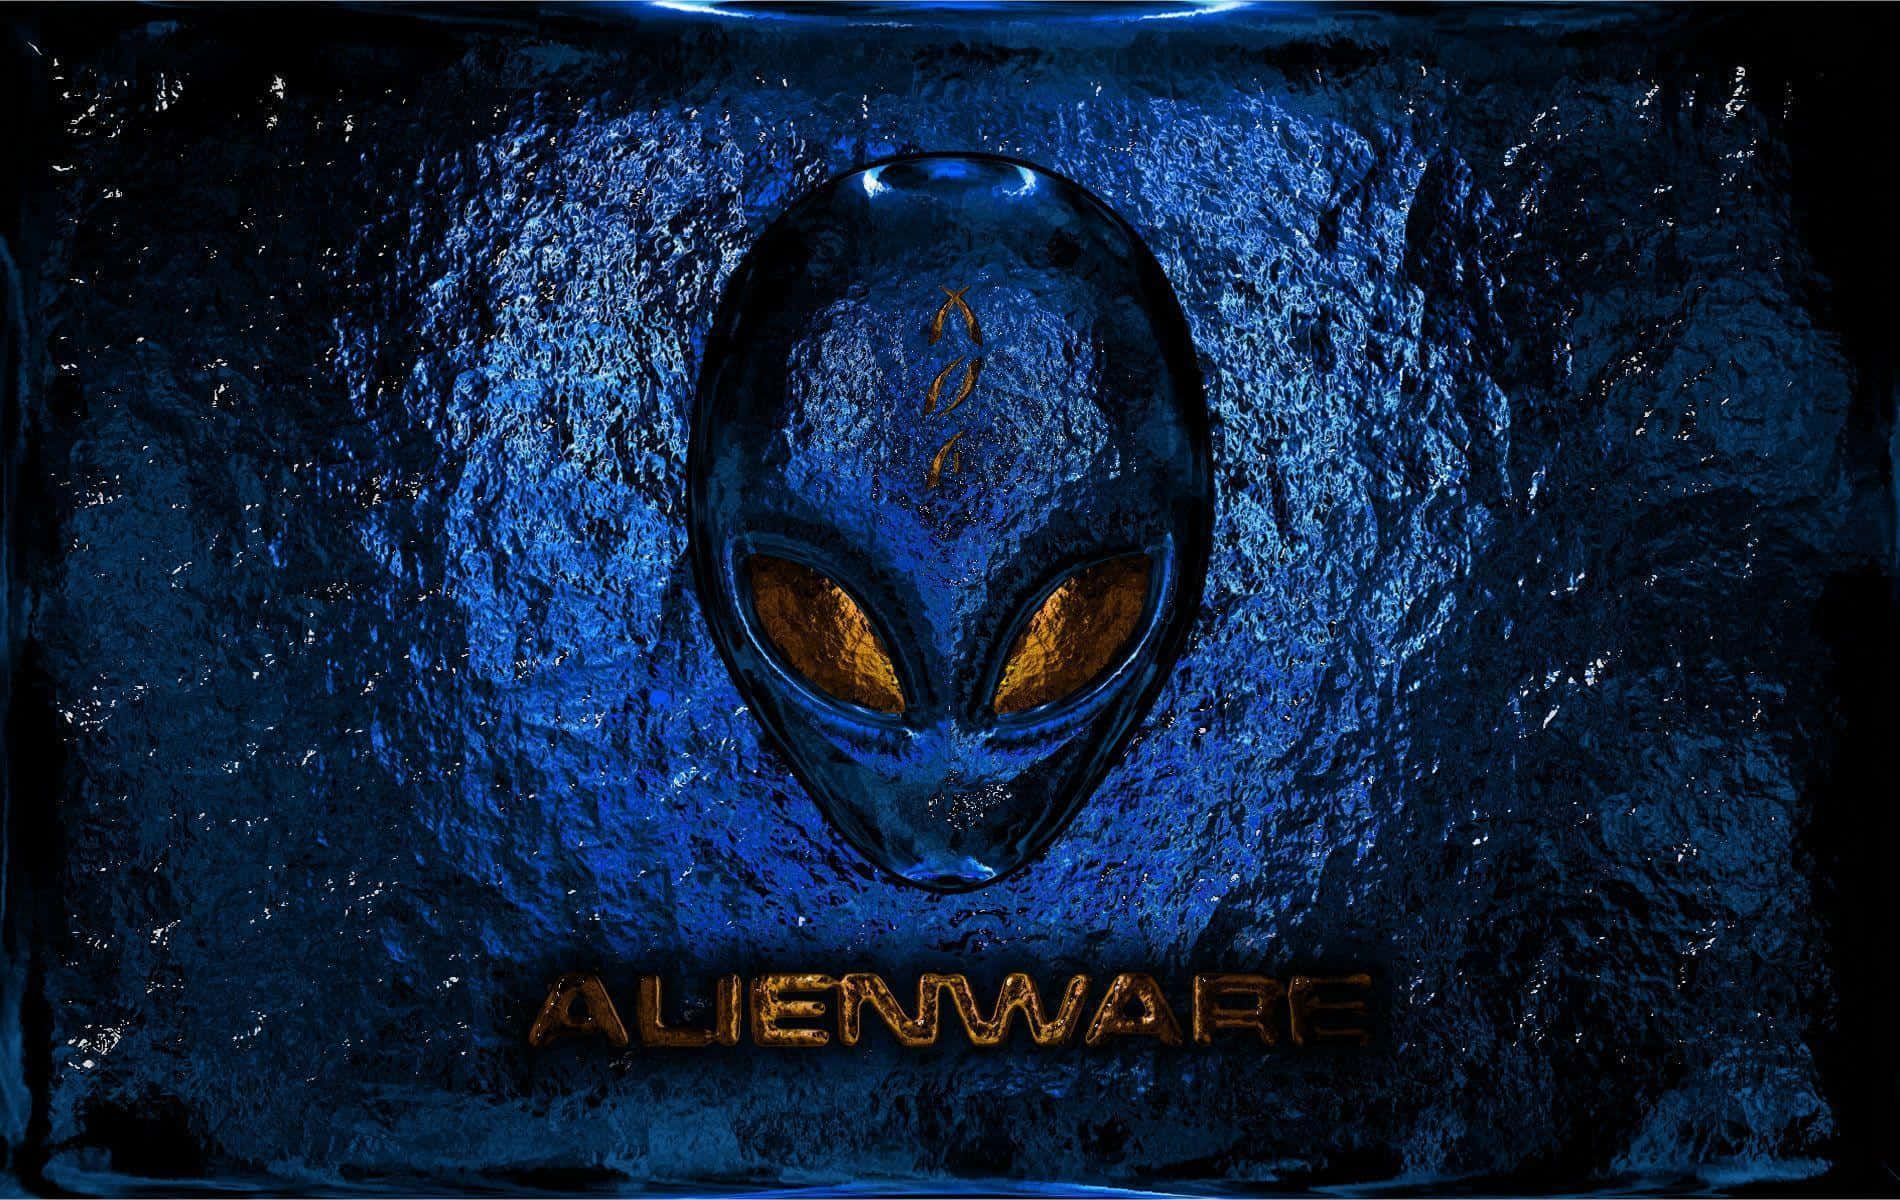 Get Ready for Out-of-this-World Gaming with Alienware